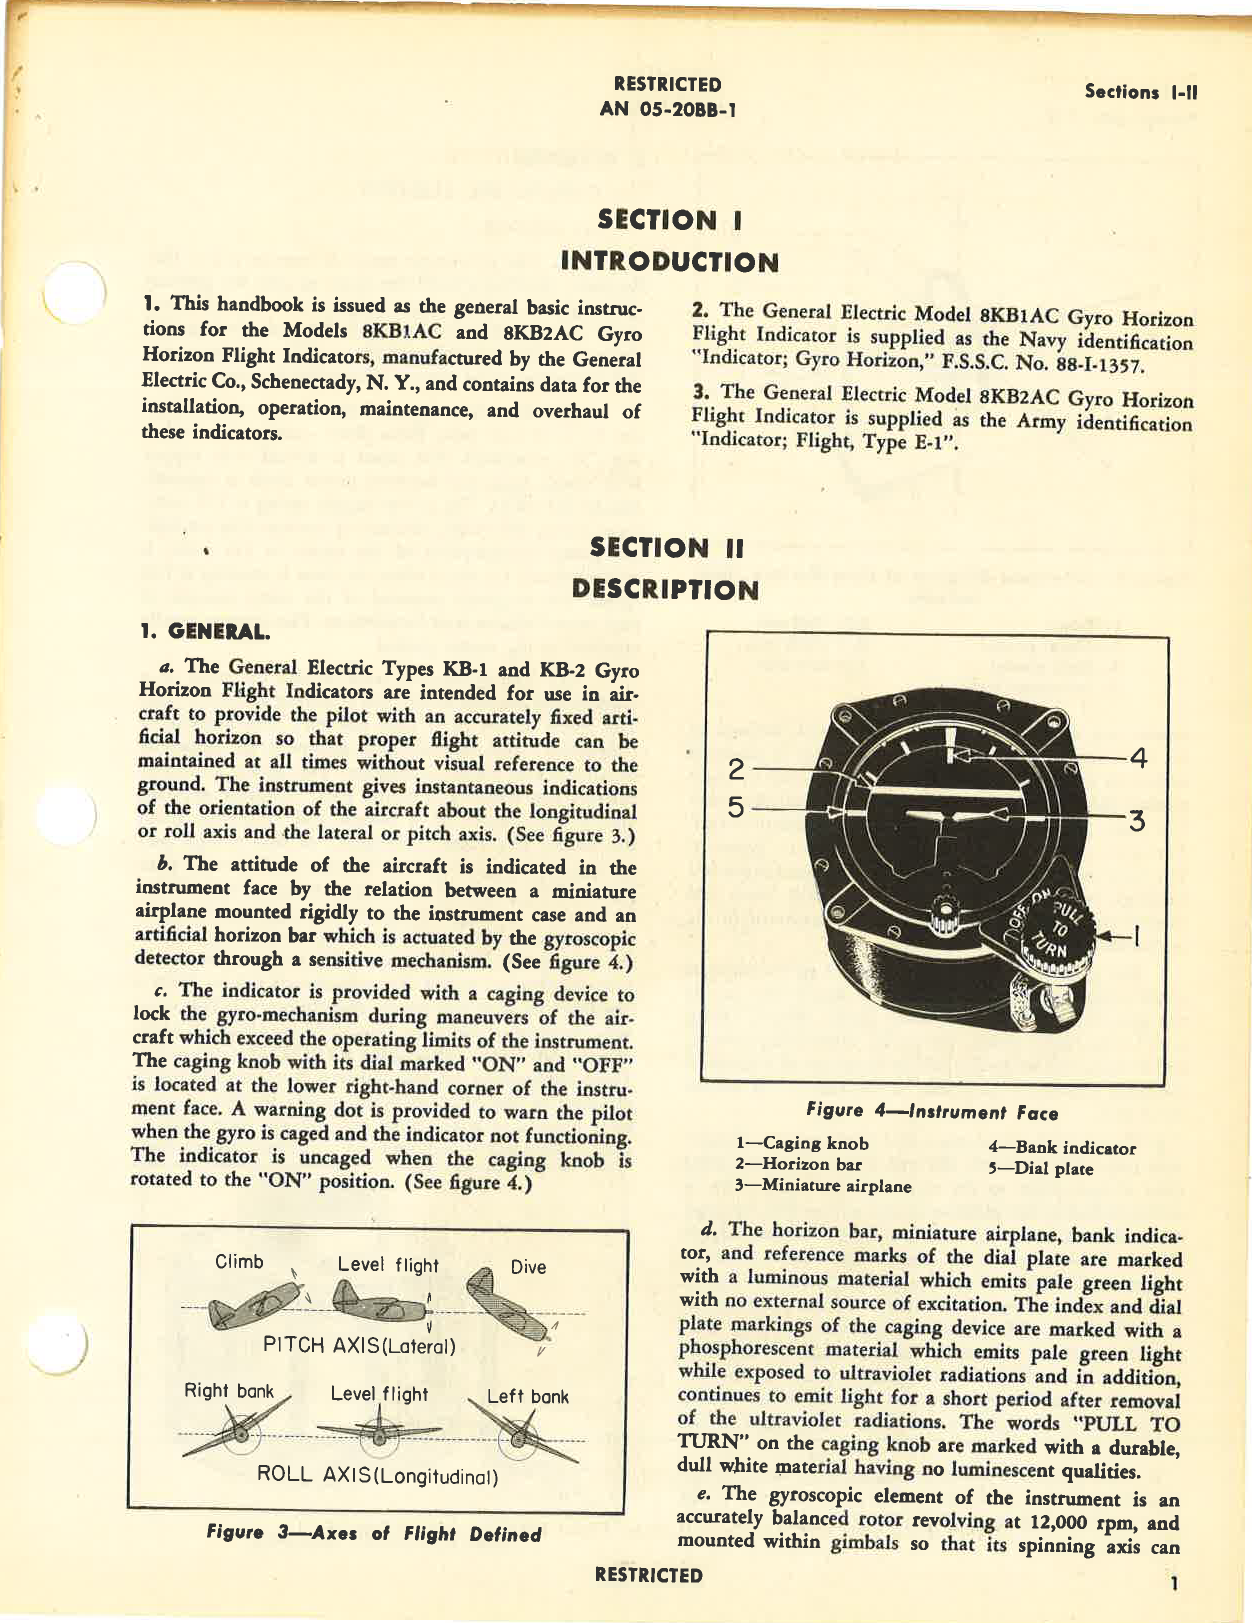 Sample page 5 from AirCorps Library document: Handbook of Instructions with Parts Catalog for Gyro Horizon Indicator Type E-1, F.S.S.C. 88-I-1357